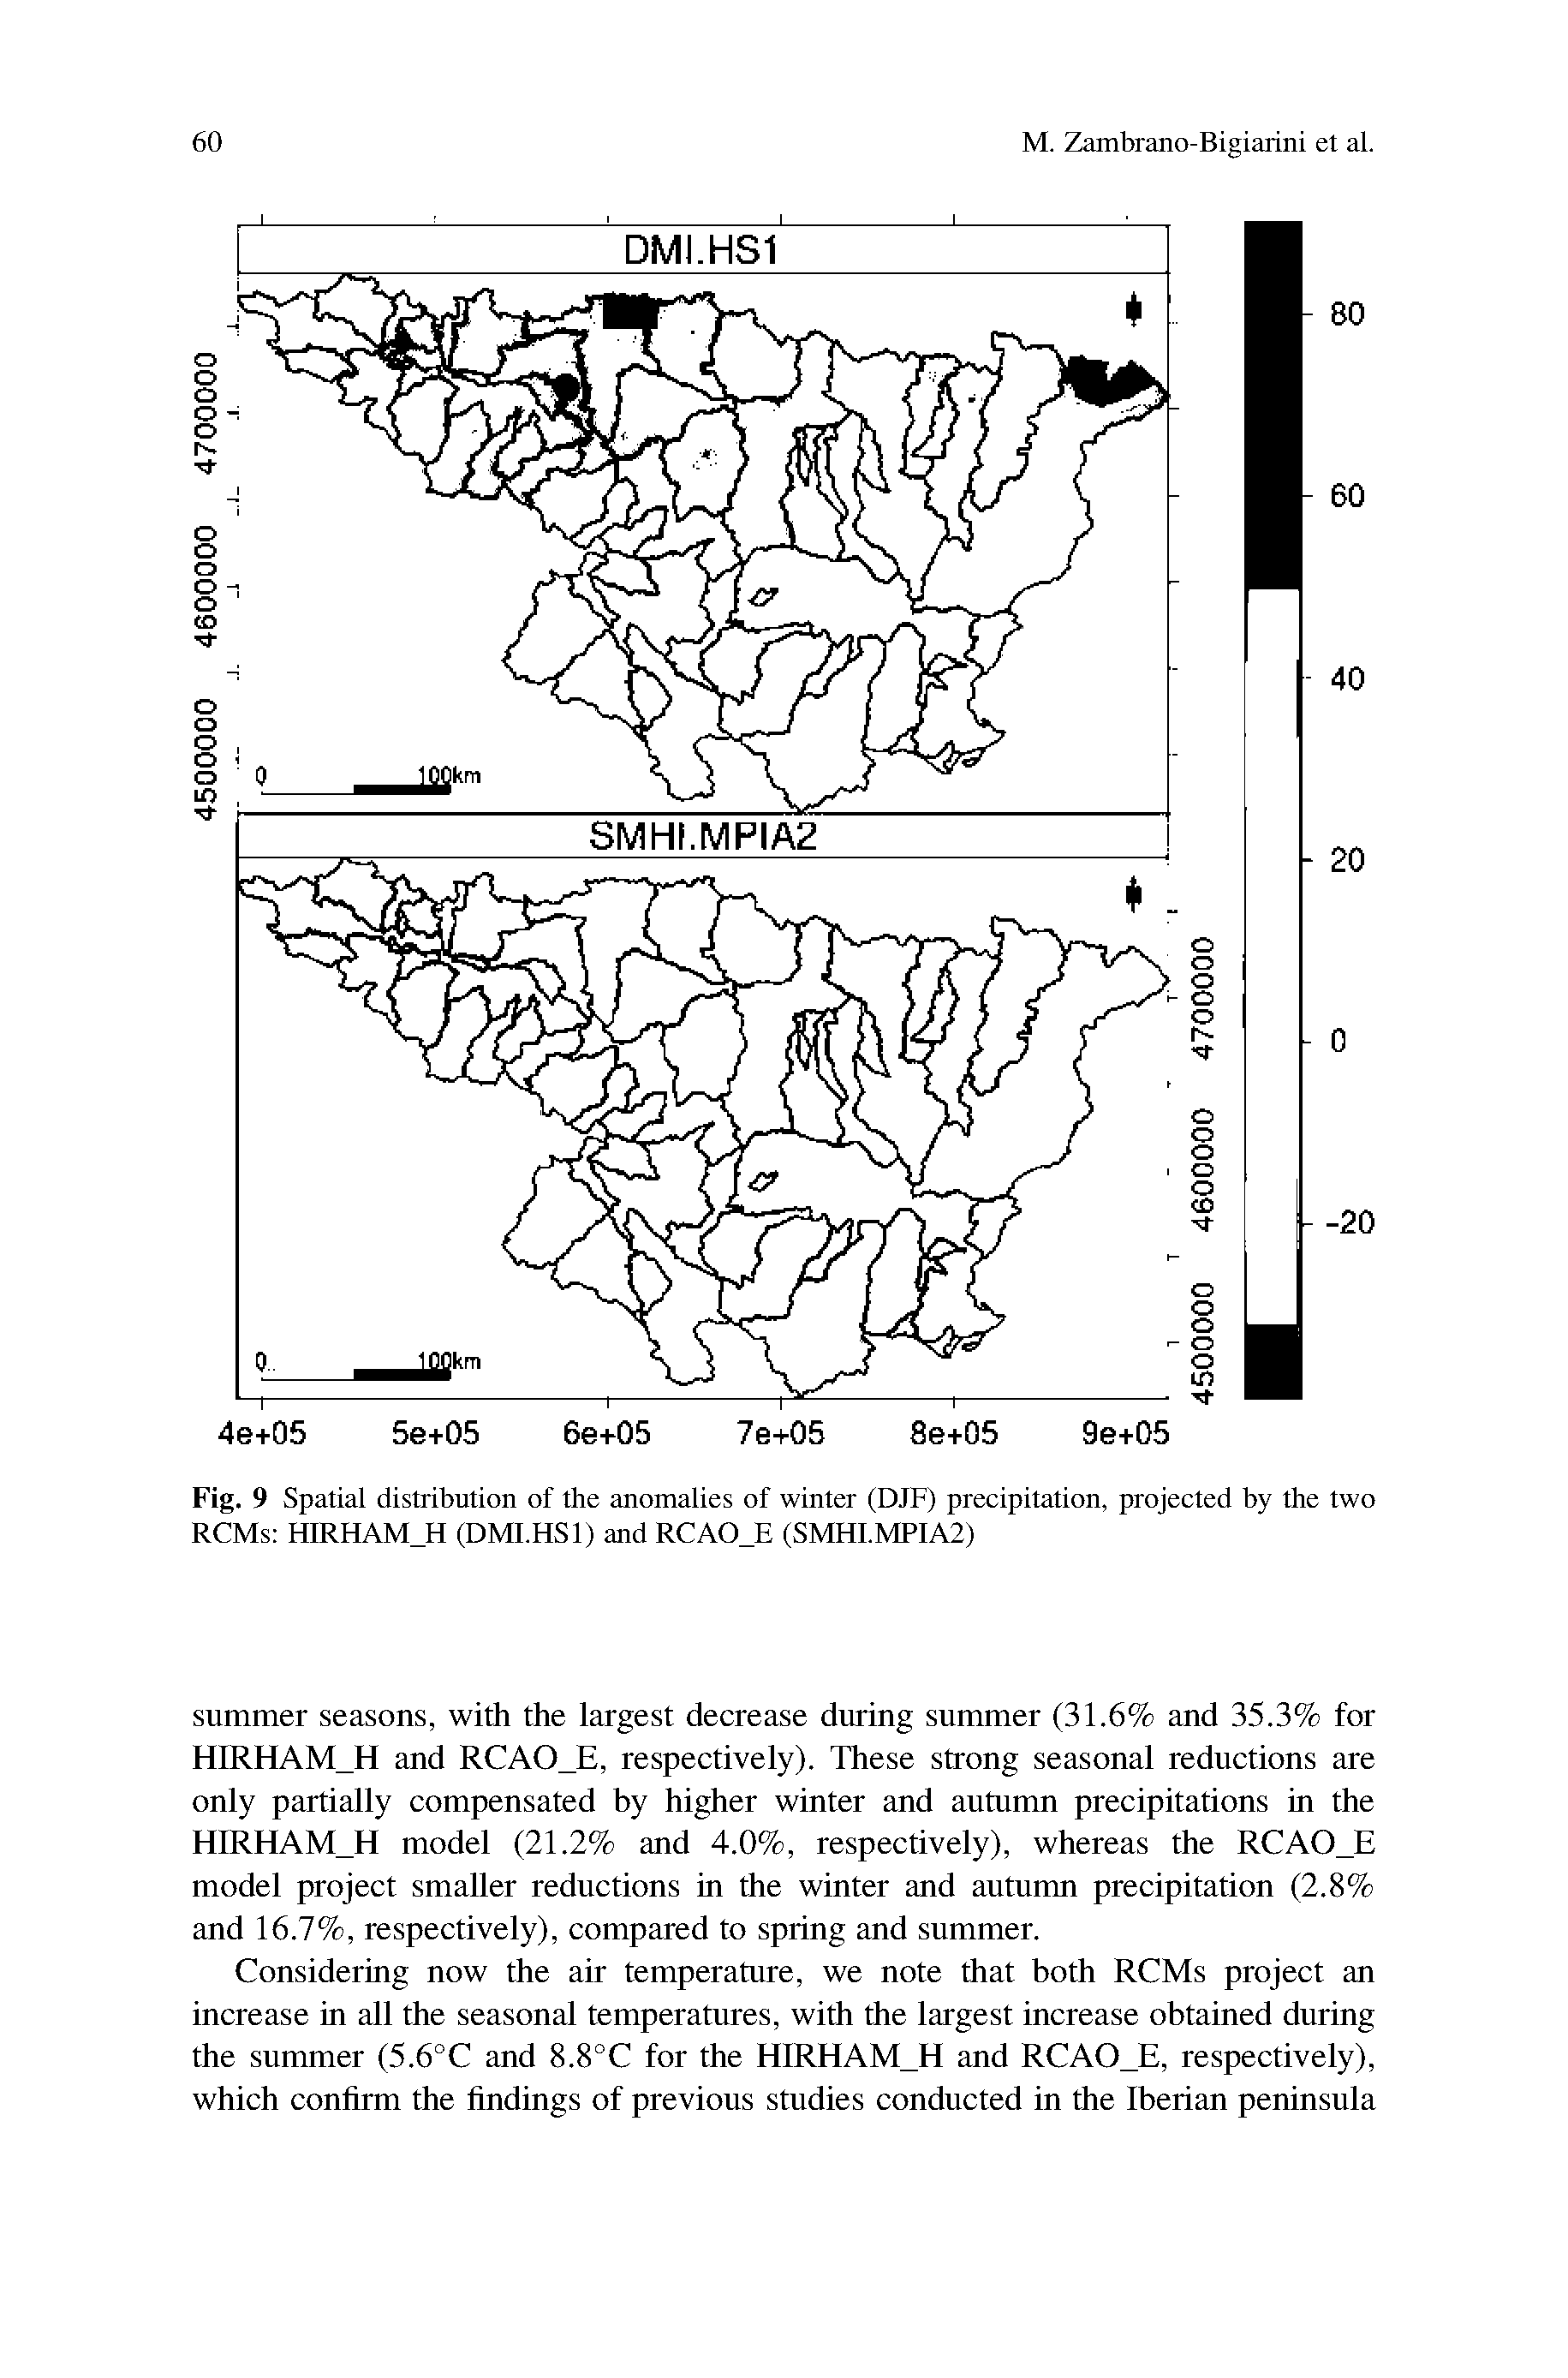 Fig. 9 Spatial distribution of the anomalies of winter (DJF) precipitation, projected by the two RCMs HIRHAM H (DMI.HS1) and RCAO E (SMHI.MPIA2)...